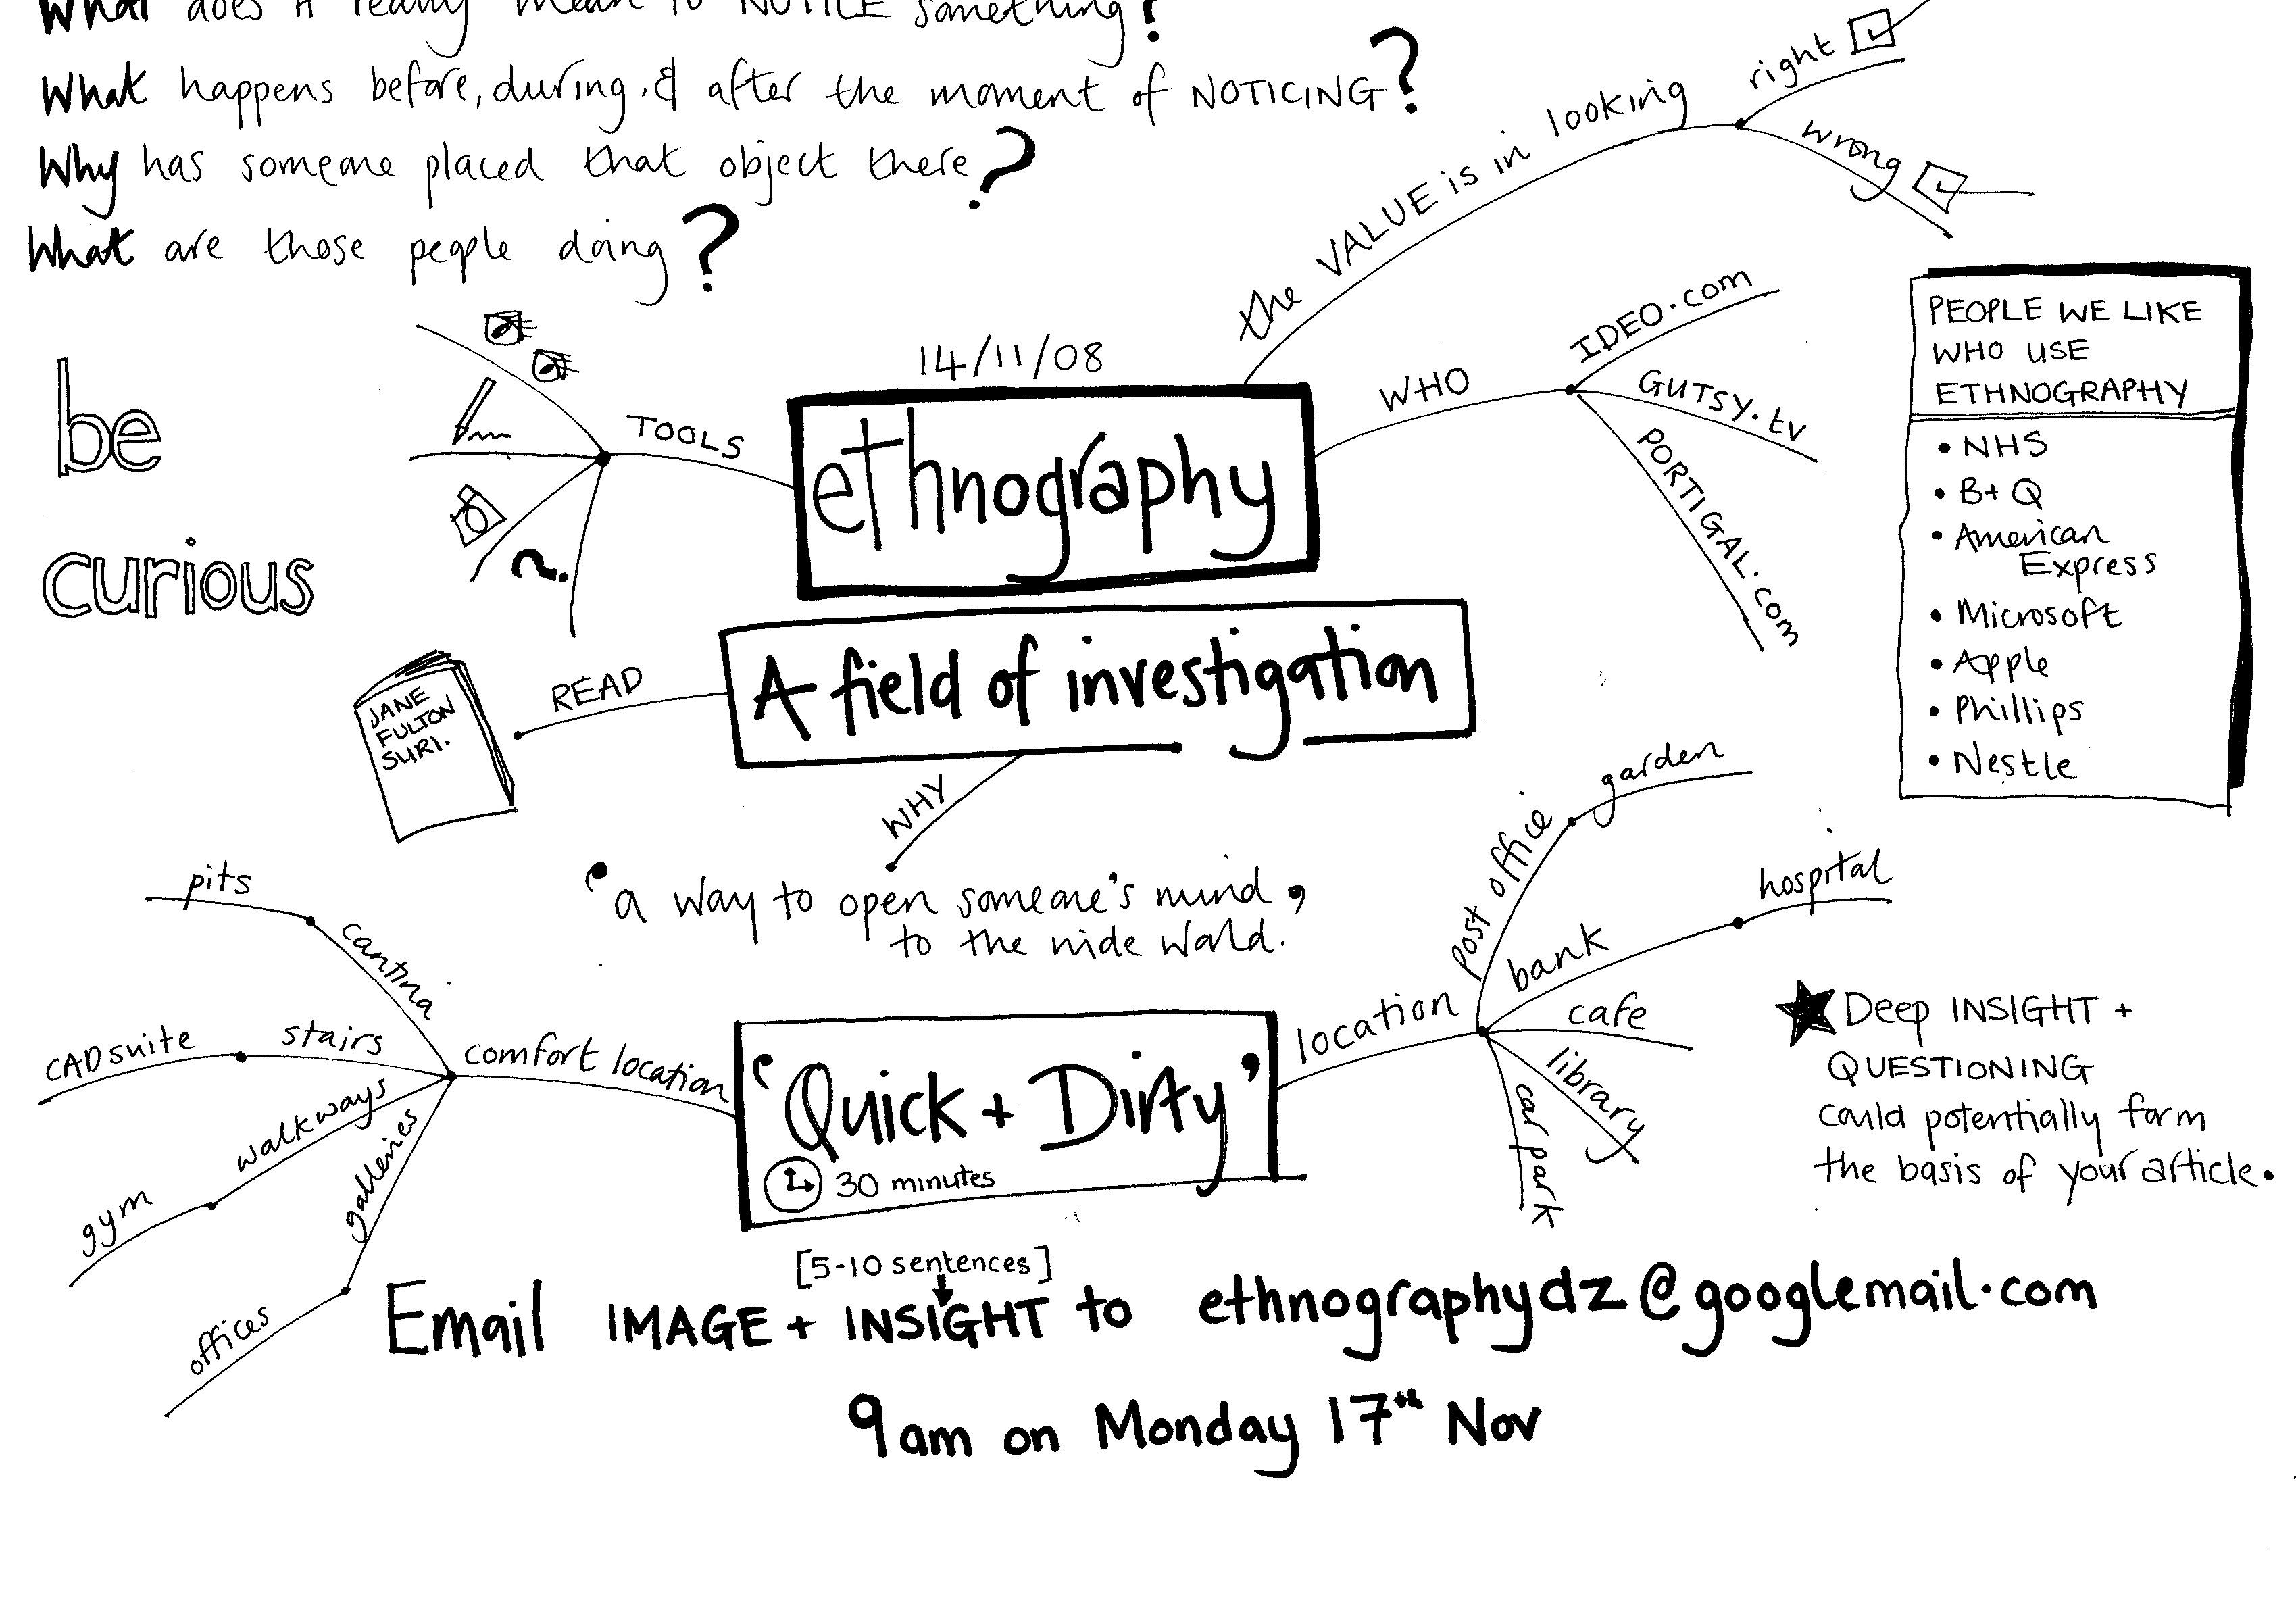 **Figure: Ethnography**? Ethnographic Methods - Expectations in Anthropology. ---Image Credit: Lauren Currie, 2008 (http://redjotter.wordpress.com/2008/11/14/introducing-ethnography/).